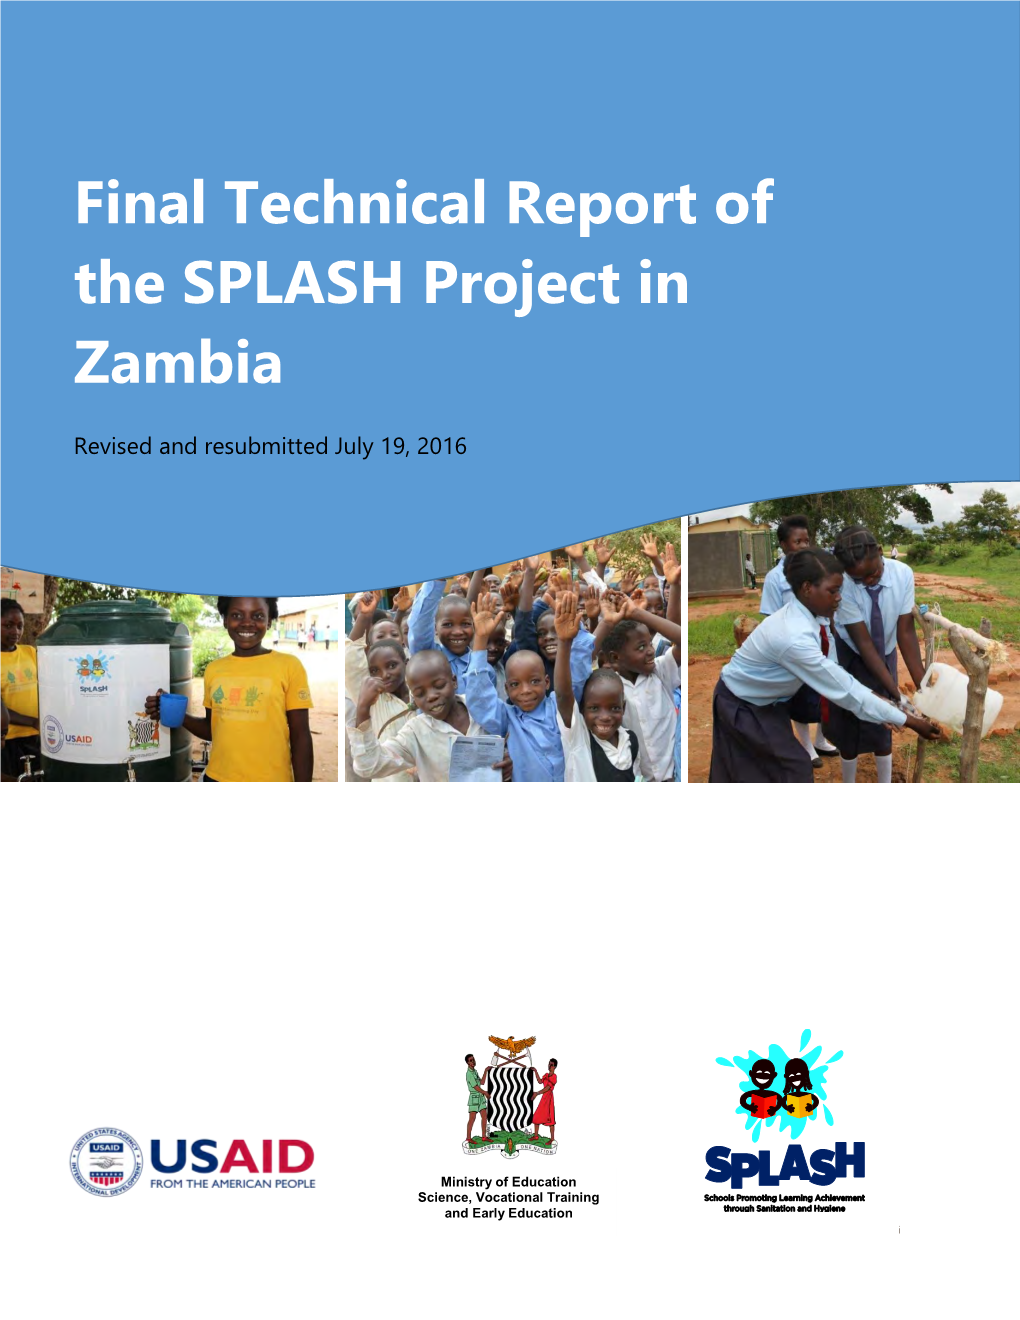 Final Technical Report of the SPLASH Project in Zambia